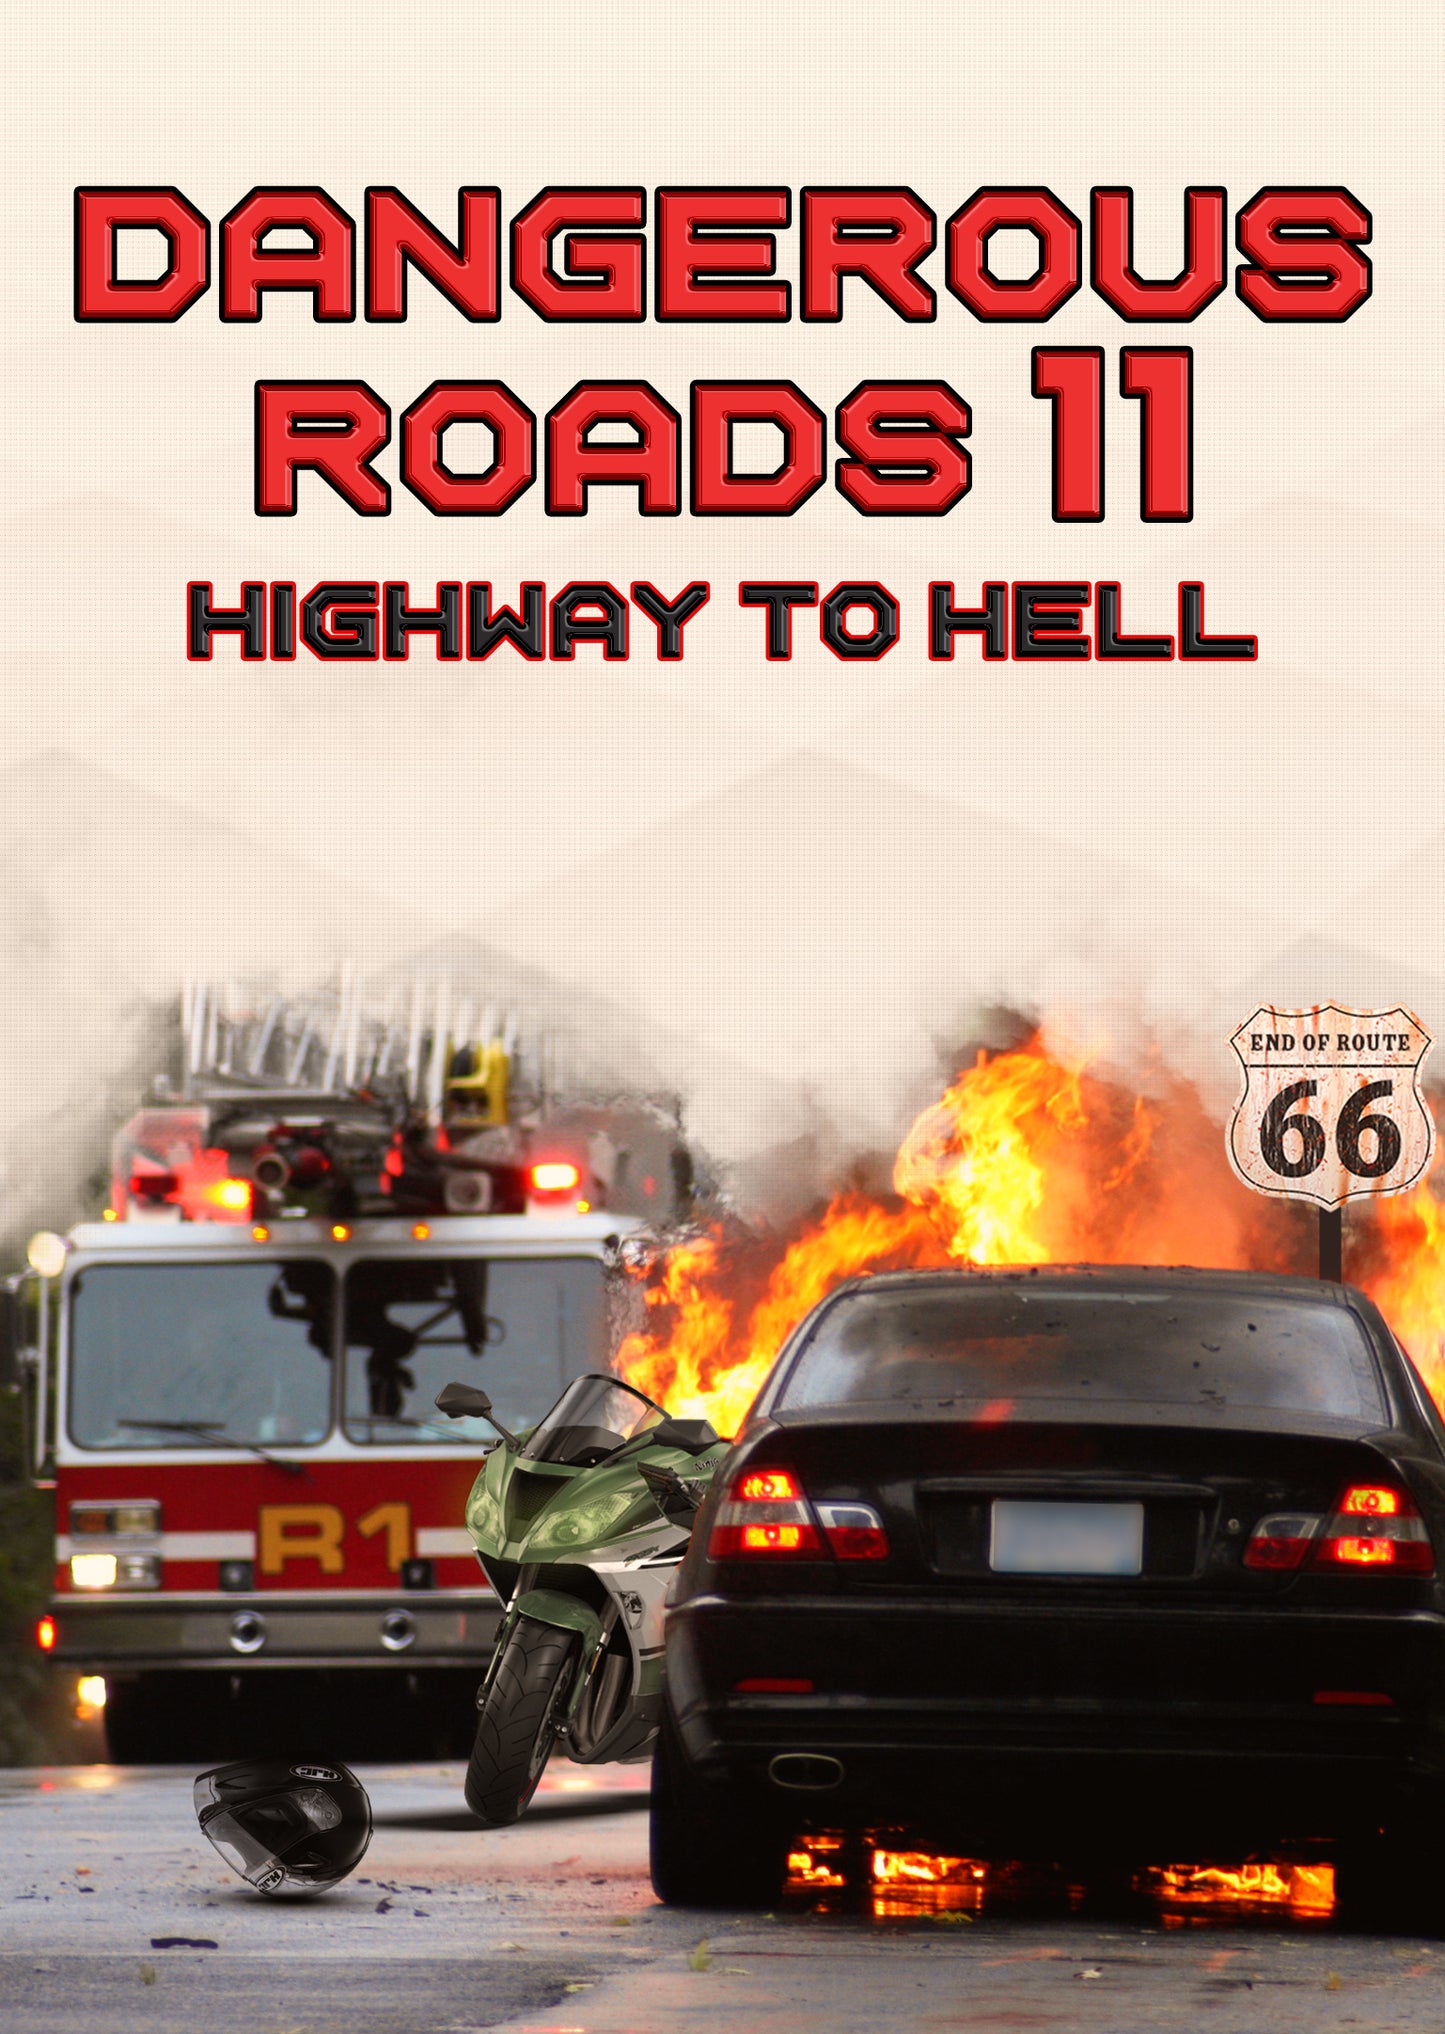 Dangerous Roads 11: Highway To Hell (USA Import) cover art